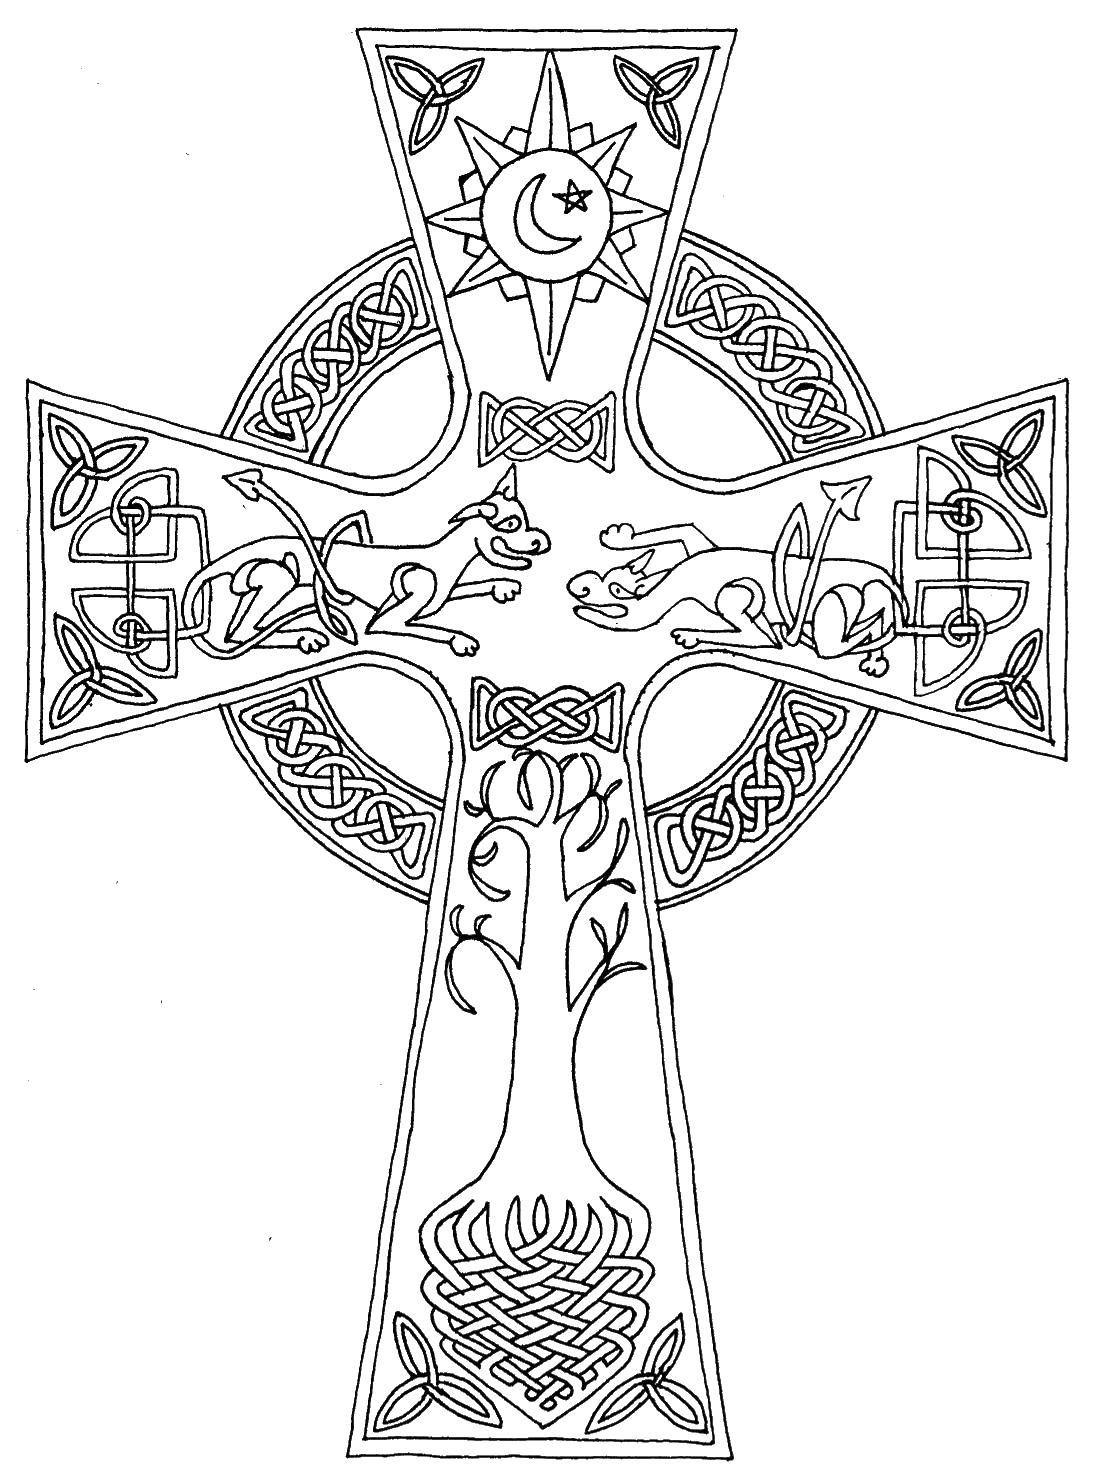 Coloring Patterned cross. Category coloring pages cross. Tags:  Cross.